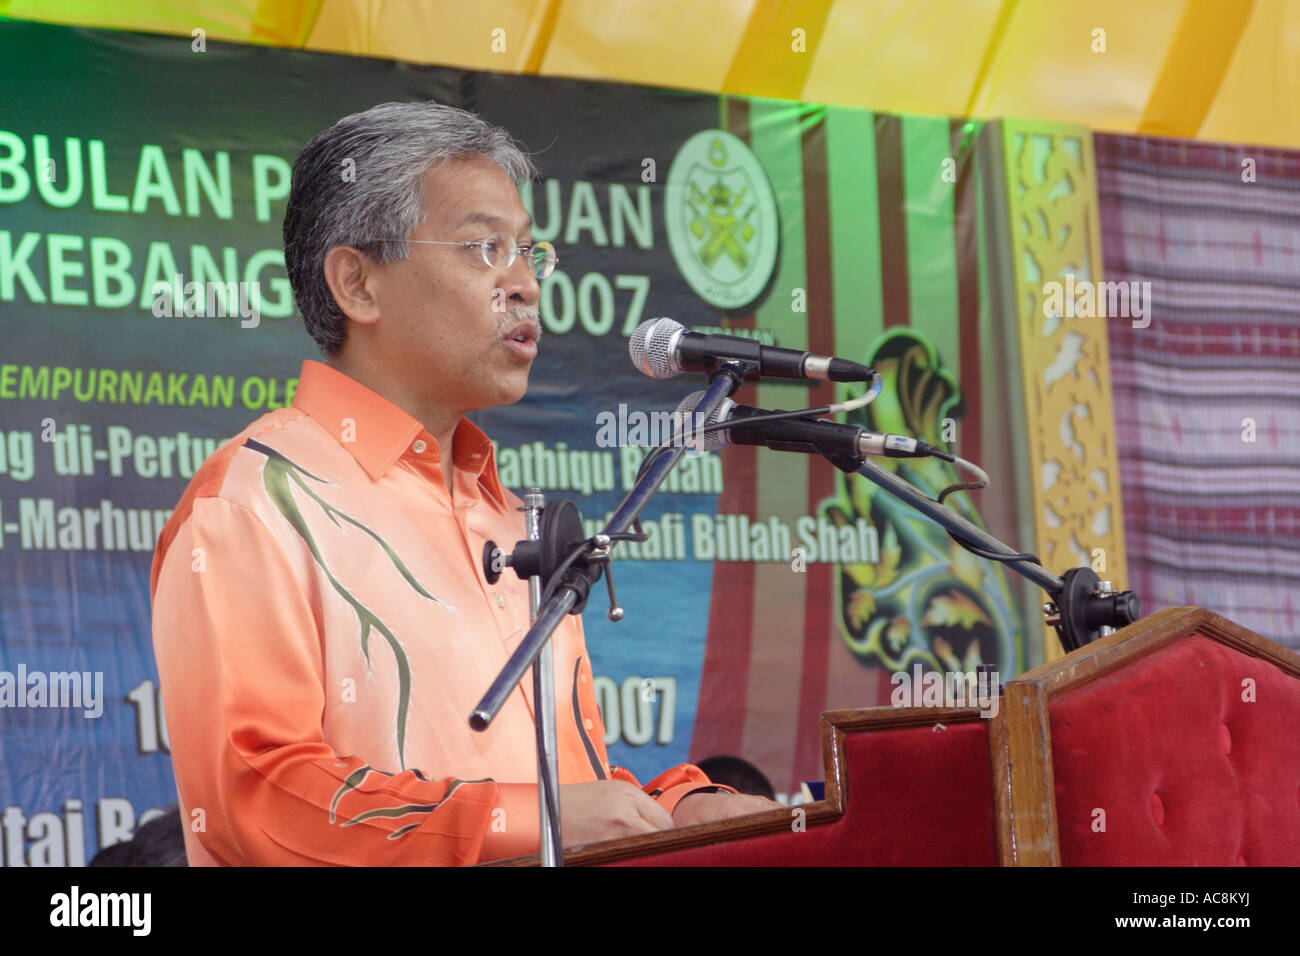 Datuk Idris Jusoh the former Chief Minister of the State of Terengganu in Malaysia making a speech. Stock Photo